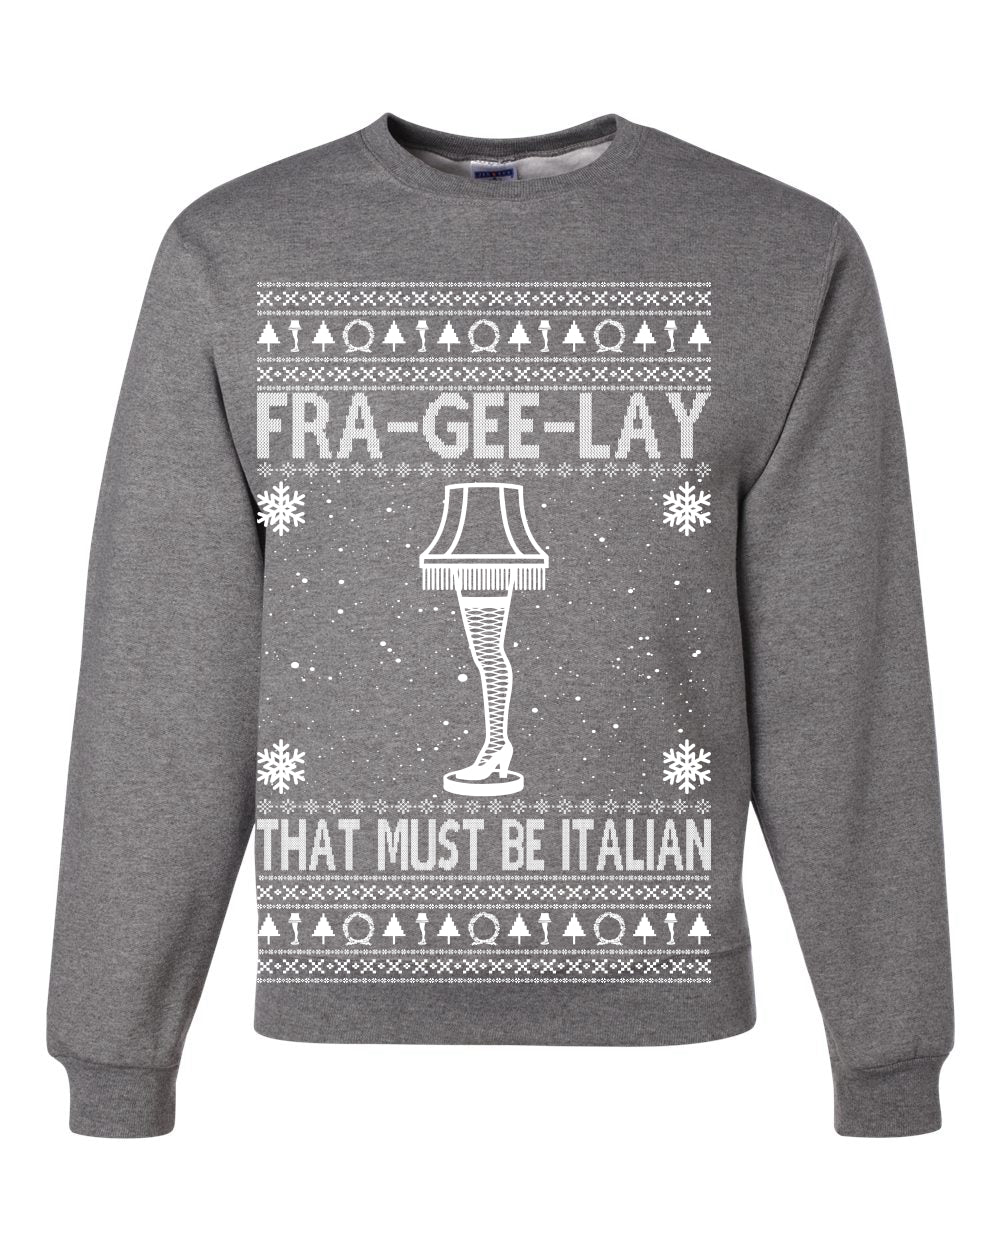 Fra-gee-lay Funny Movie Qoutes That Must Be Italian Ugly Christmas Sweater Unisex Crewneck Graphic Sweatshirt